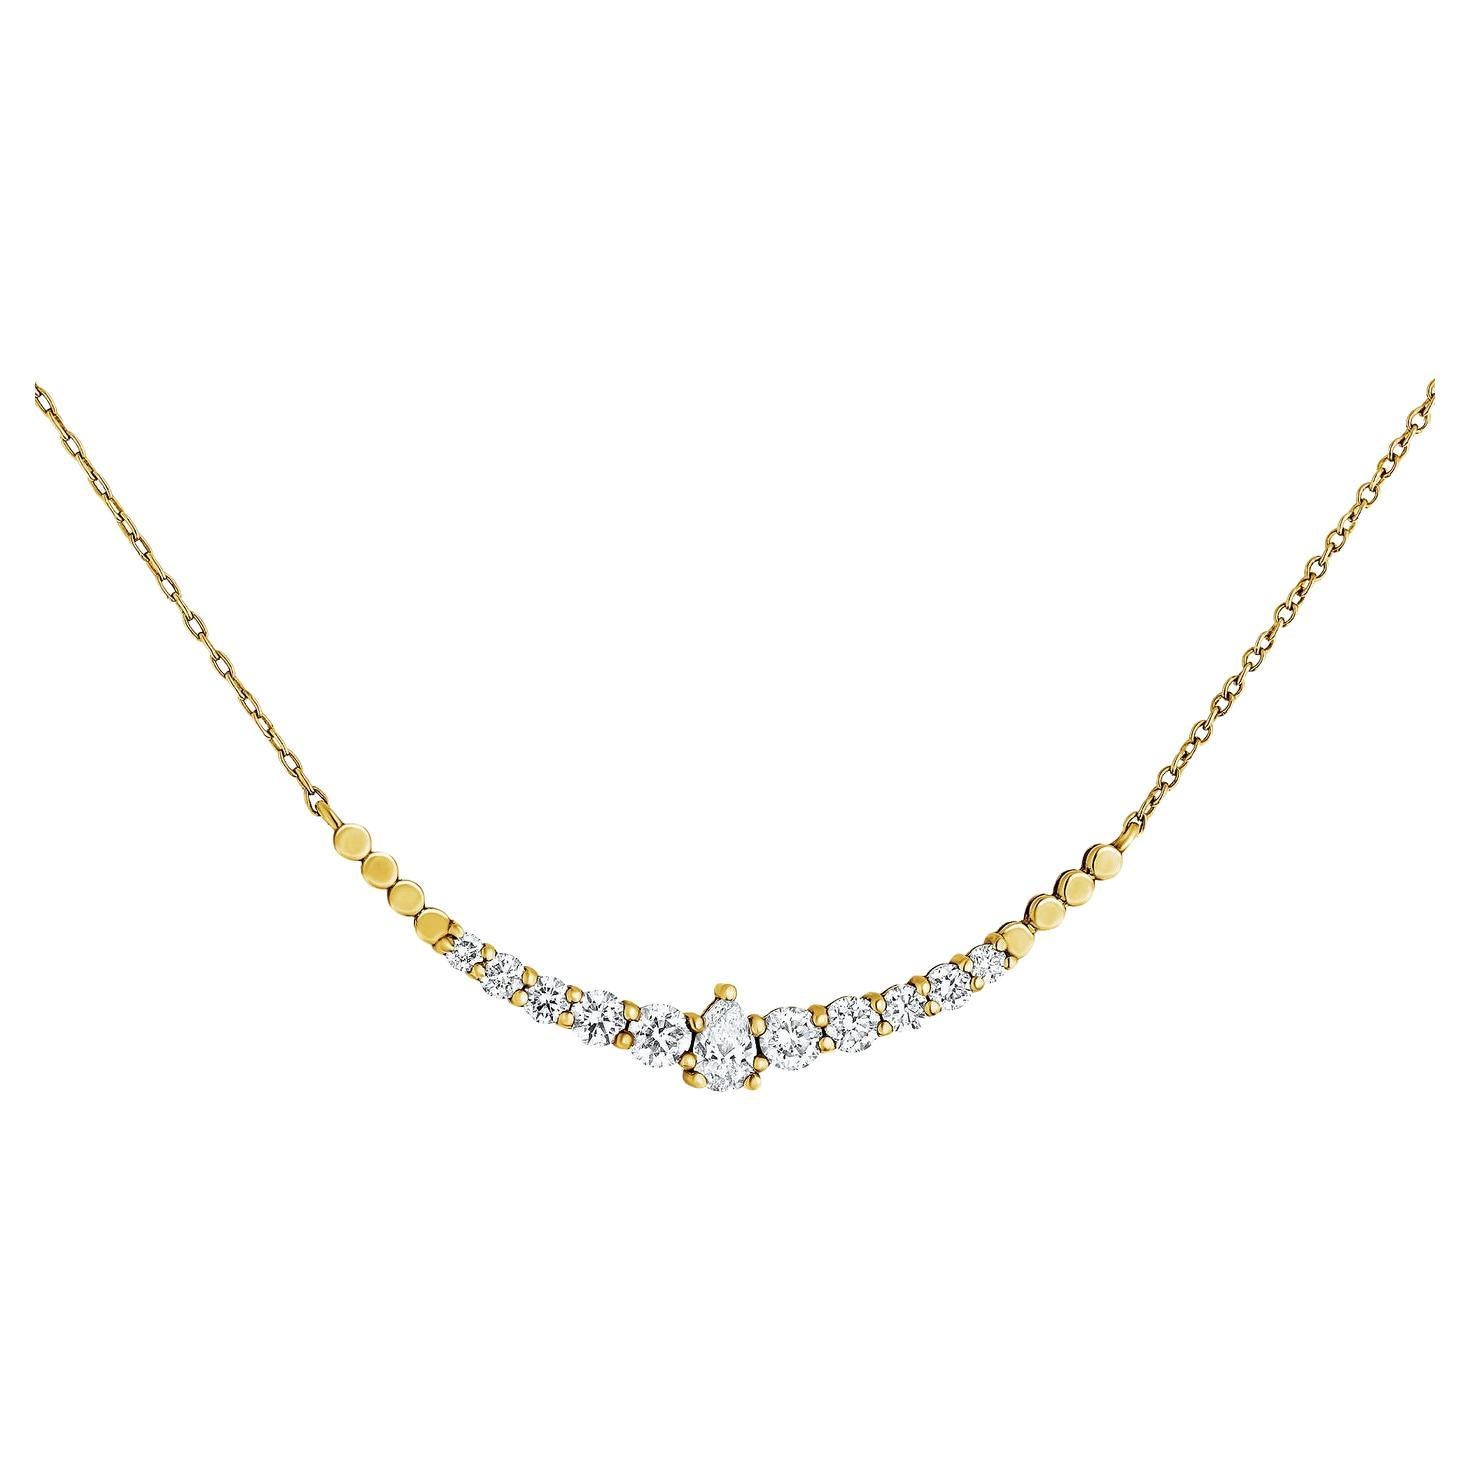 0.95 Carat Pear and Round Diamond Necklace in 14K Yellow Gold, Shlomit Rogel For Sale